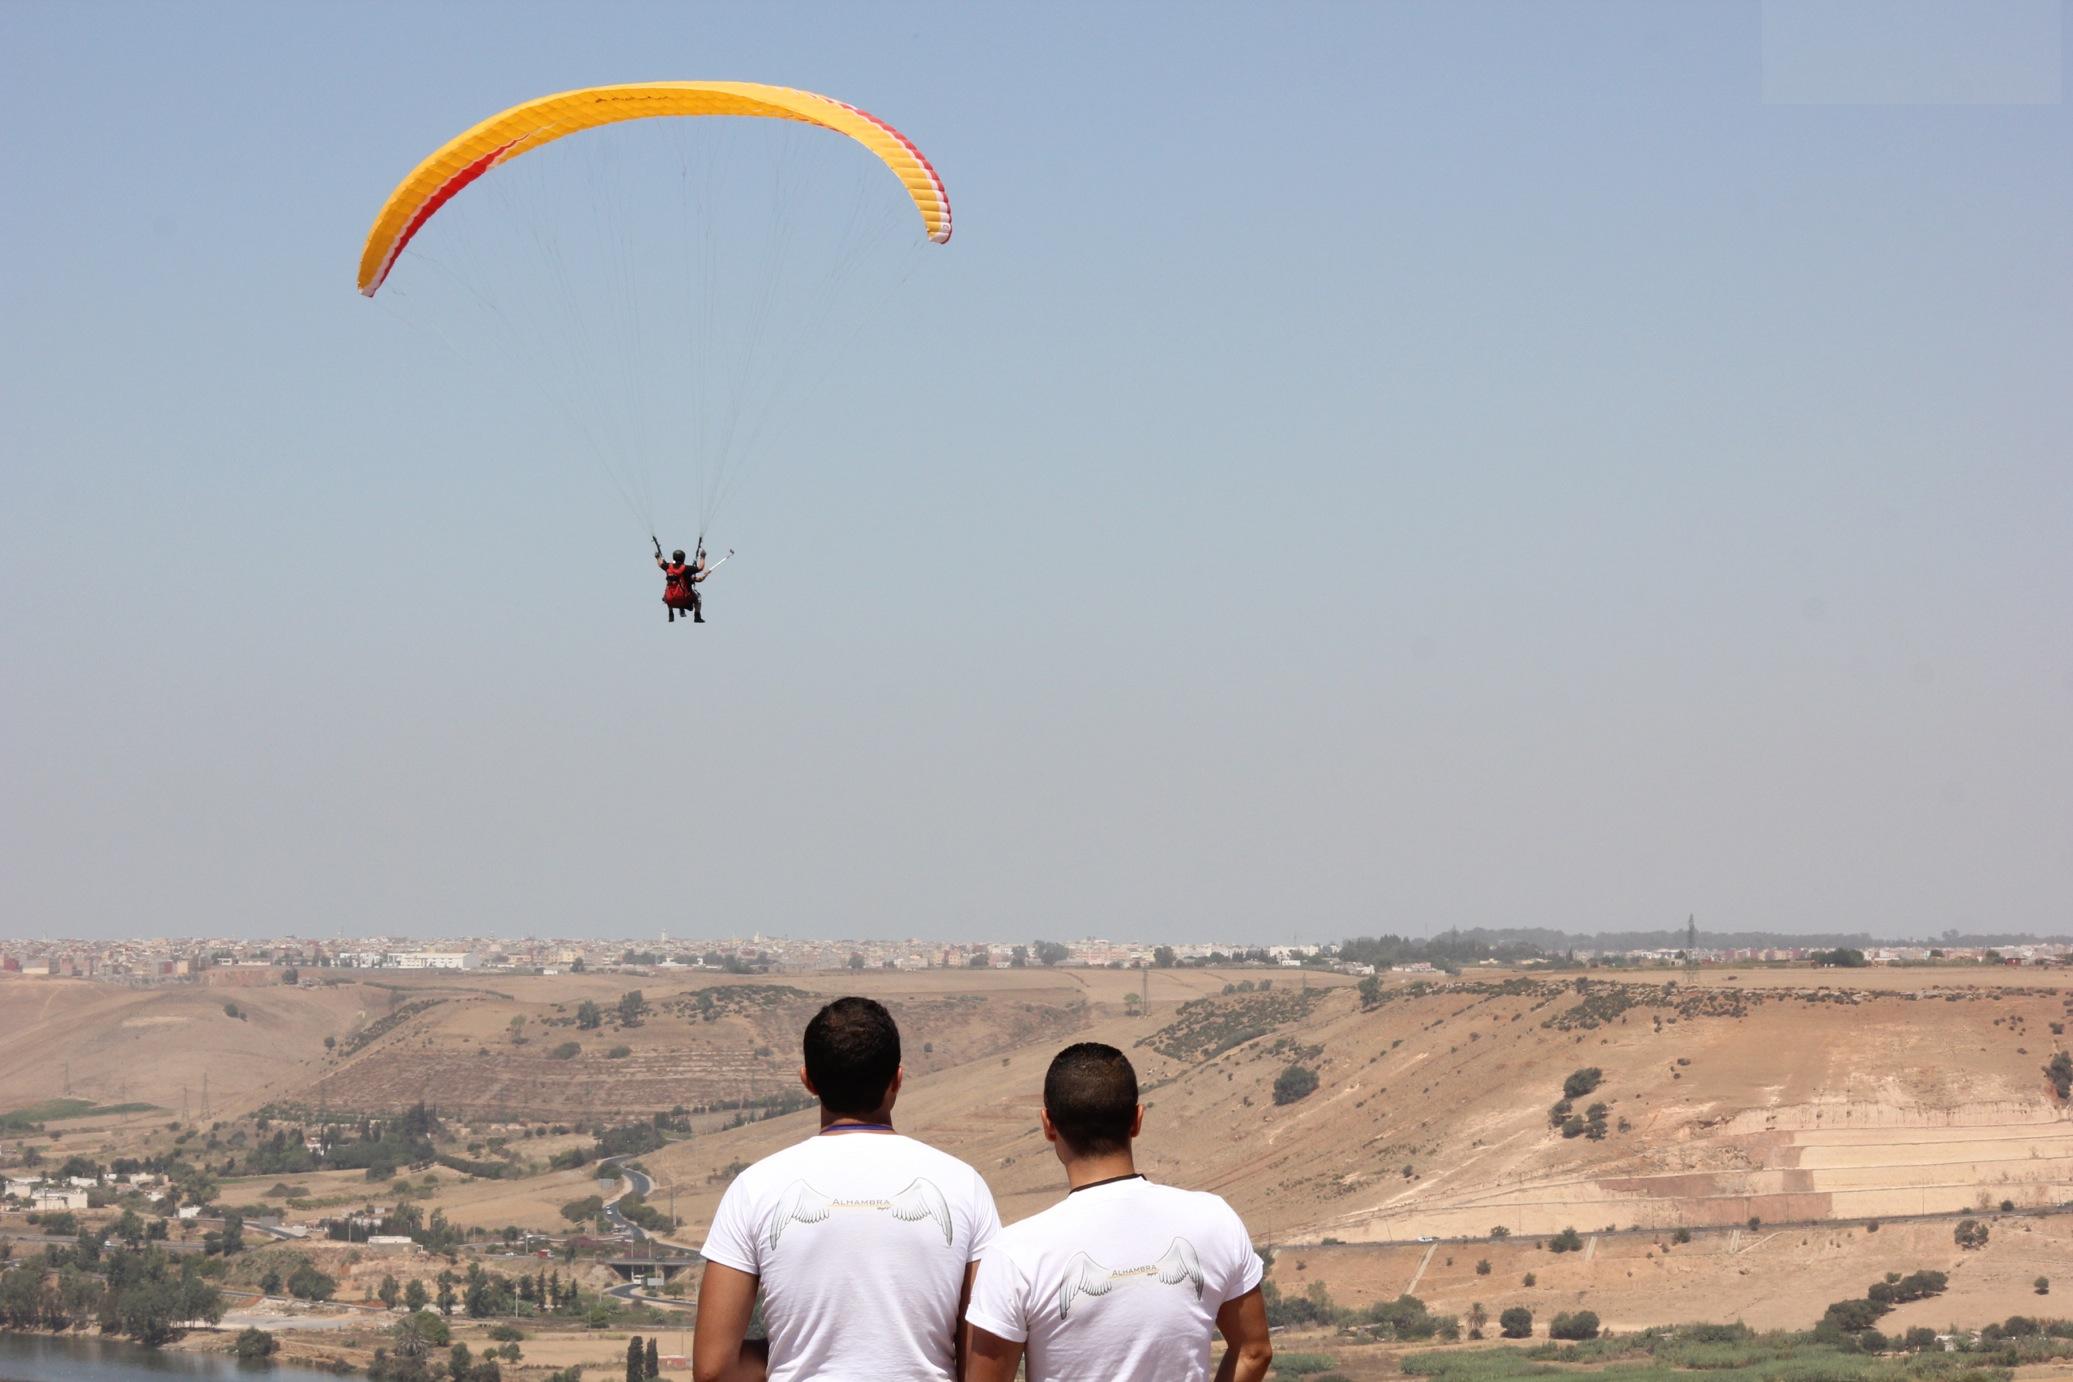 Microlight and Paragliding in Marrakech